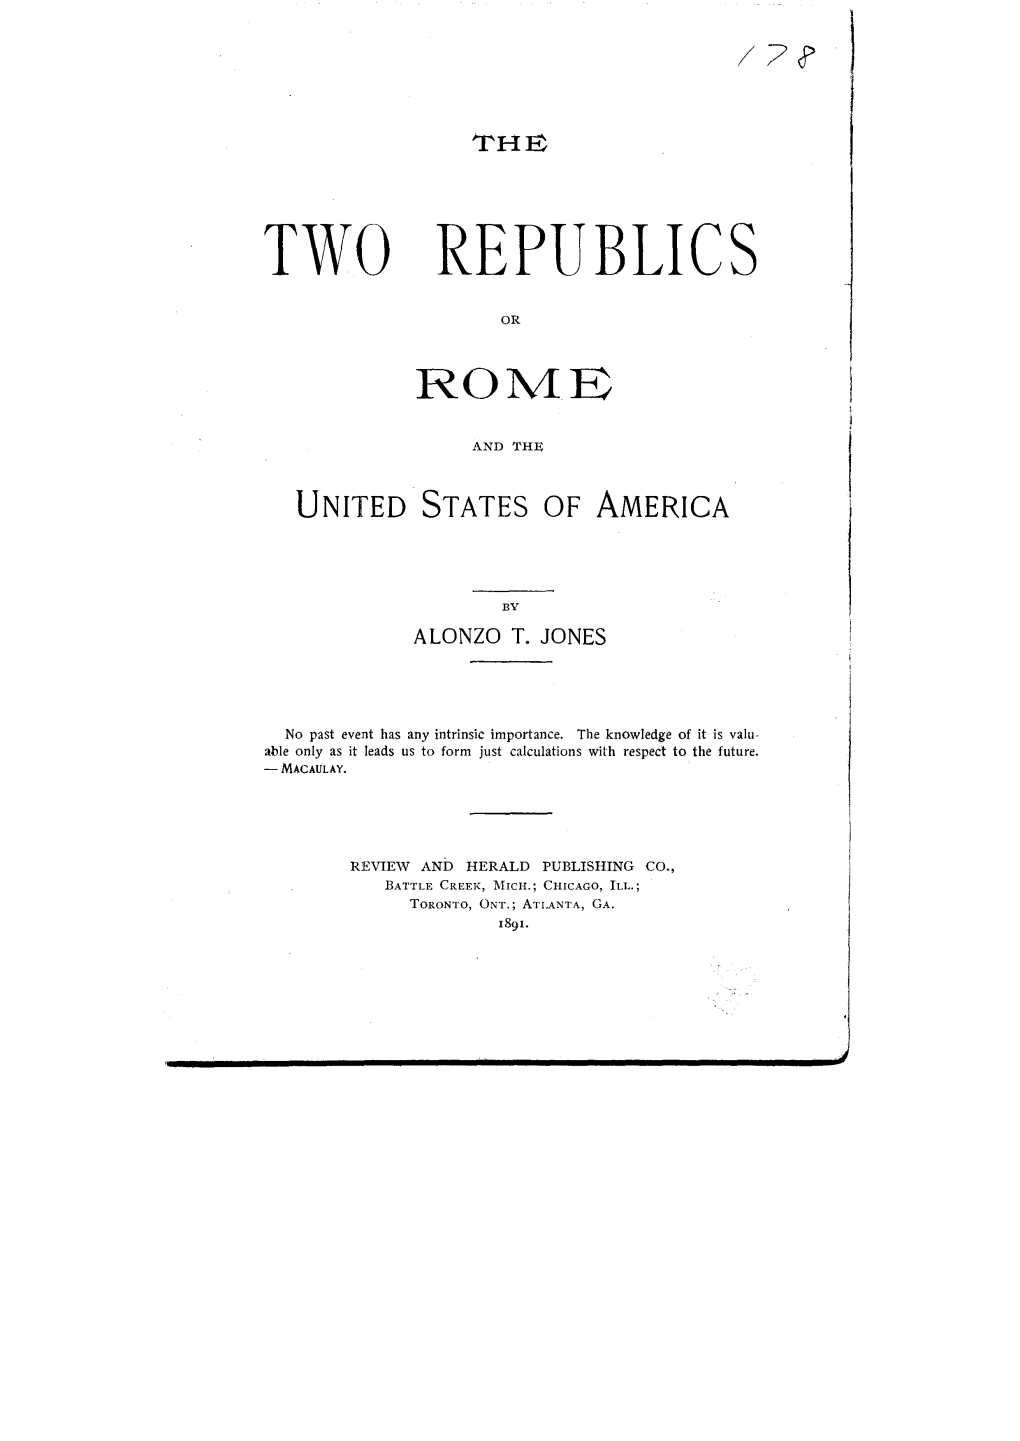 The Two Republics Or Rome and the United States of America